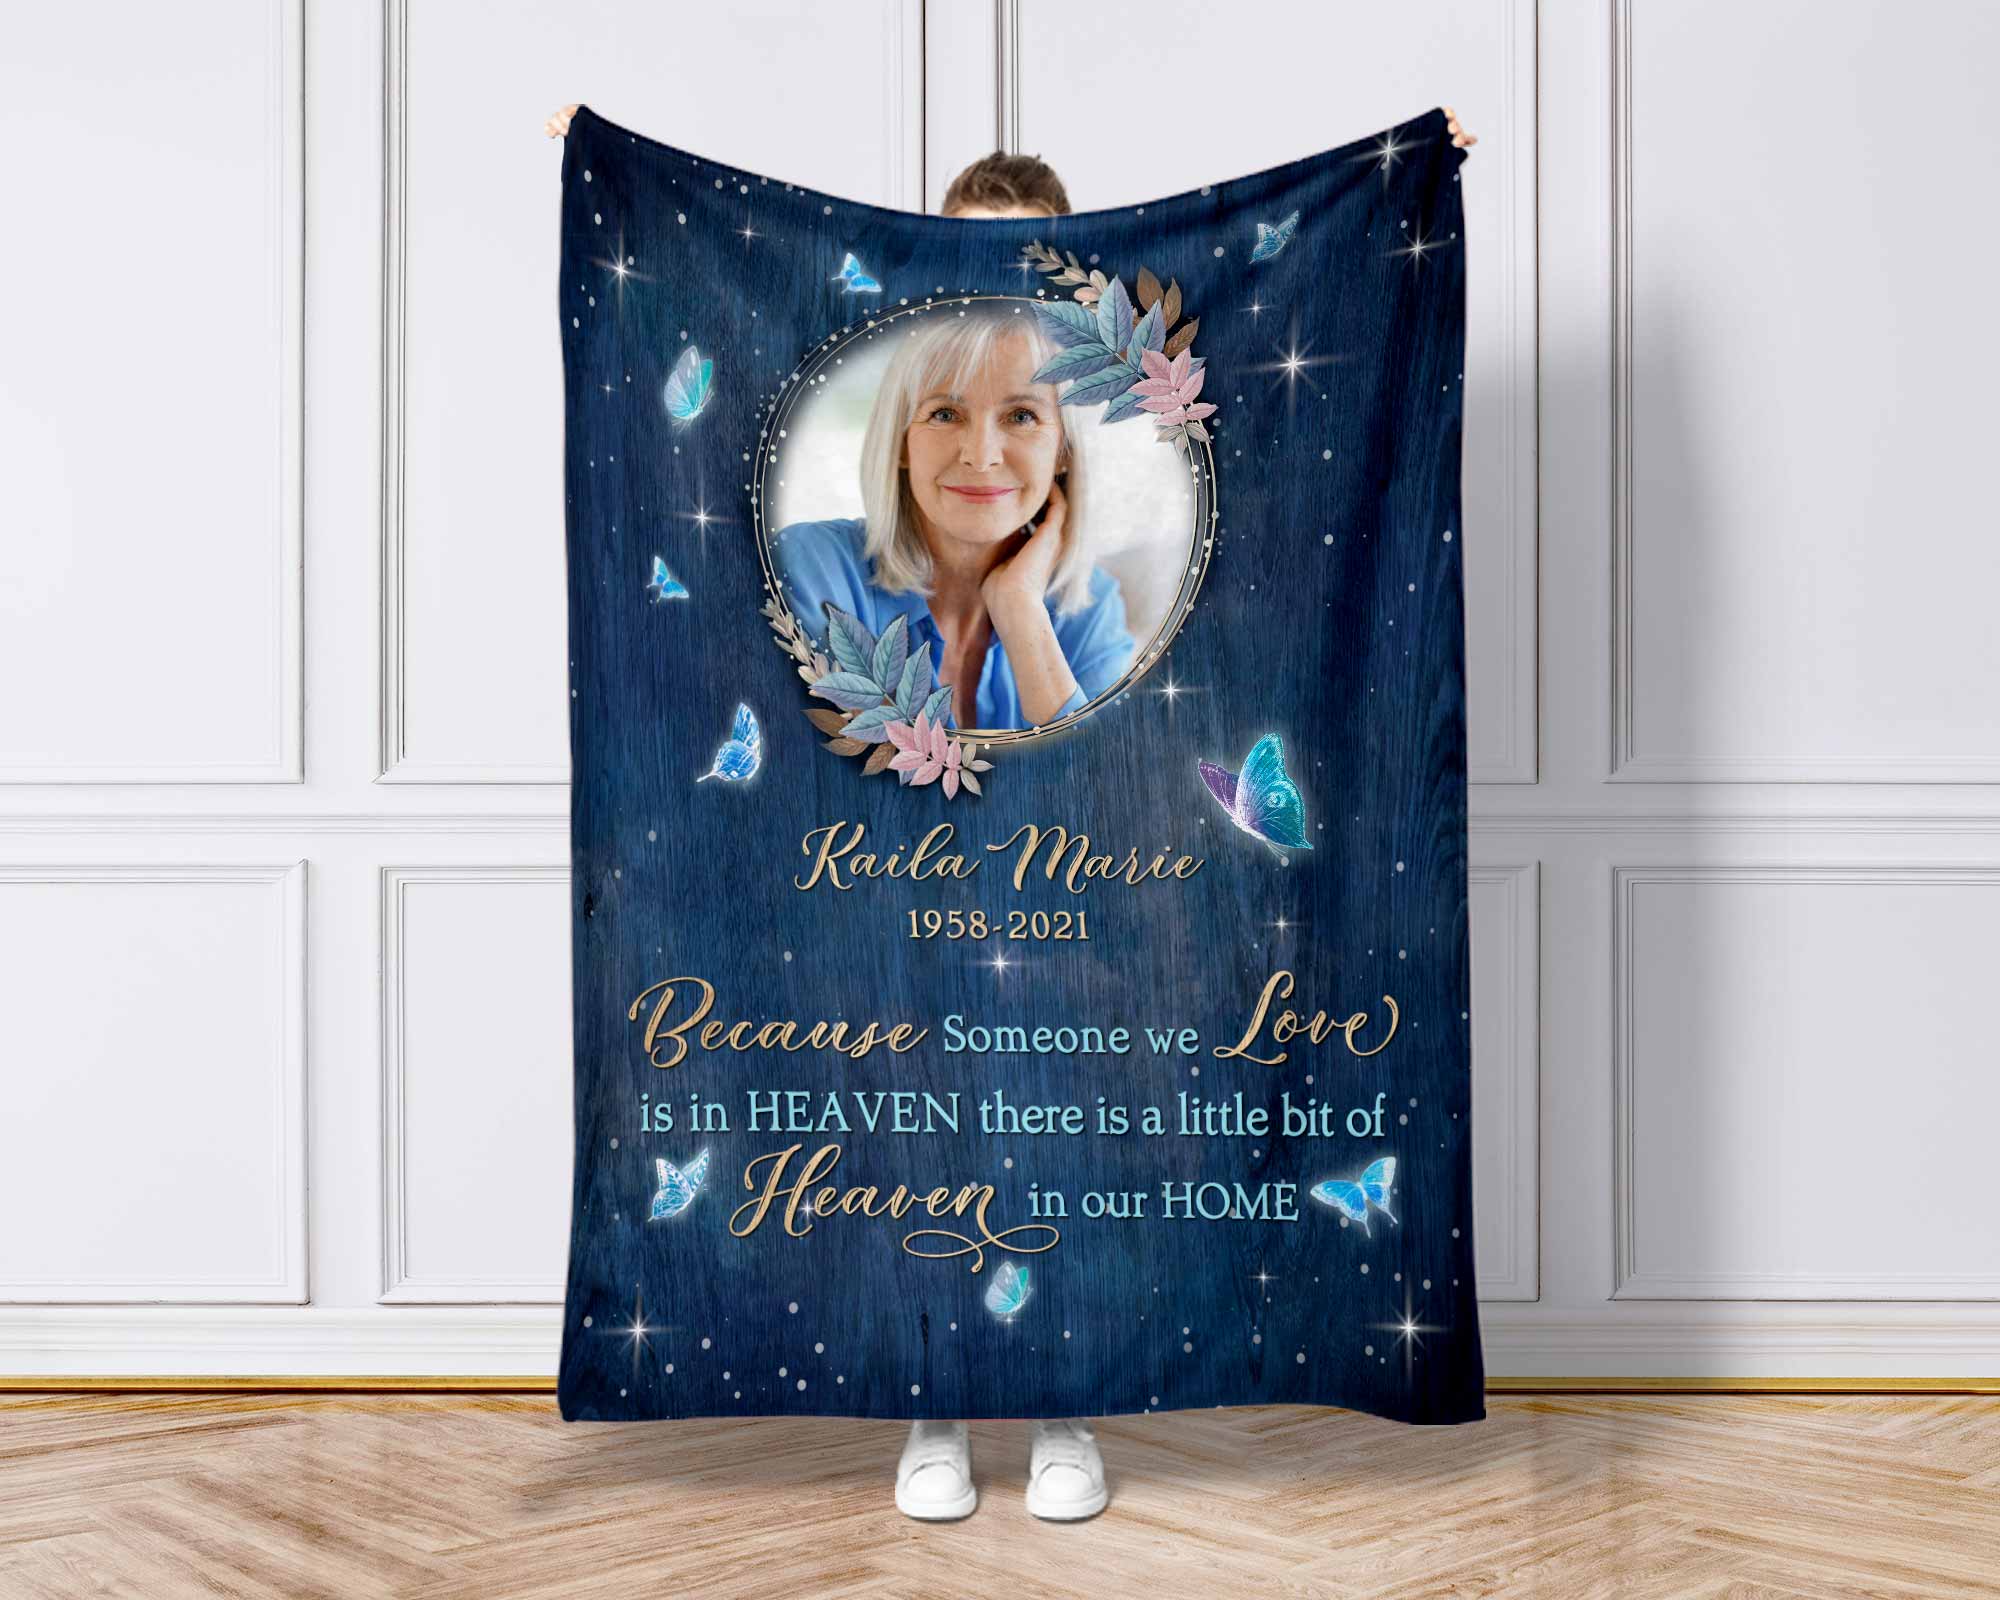 Memorial Blankets With Pictures For Loss Of Mother, Sympathy Blanket For Funeral, Bereavement Blanket